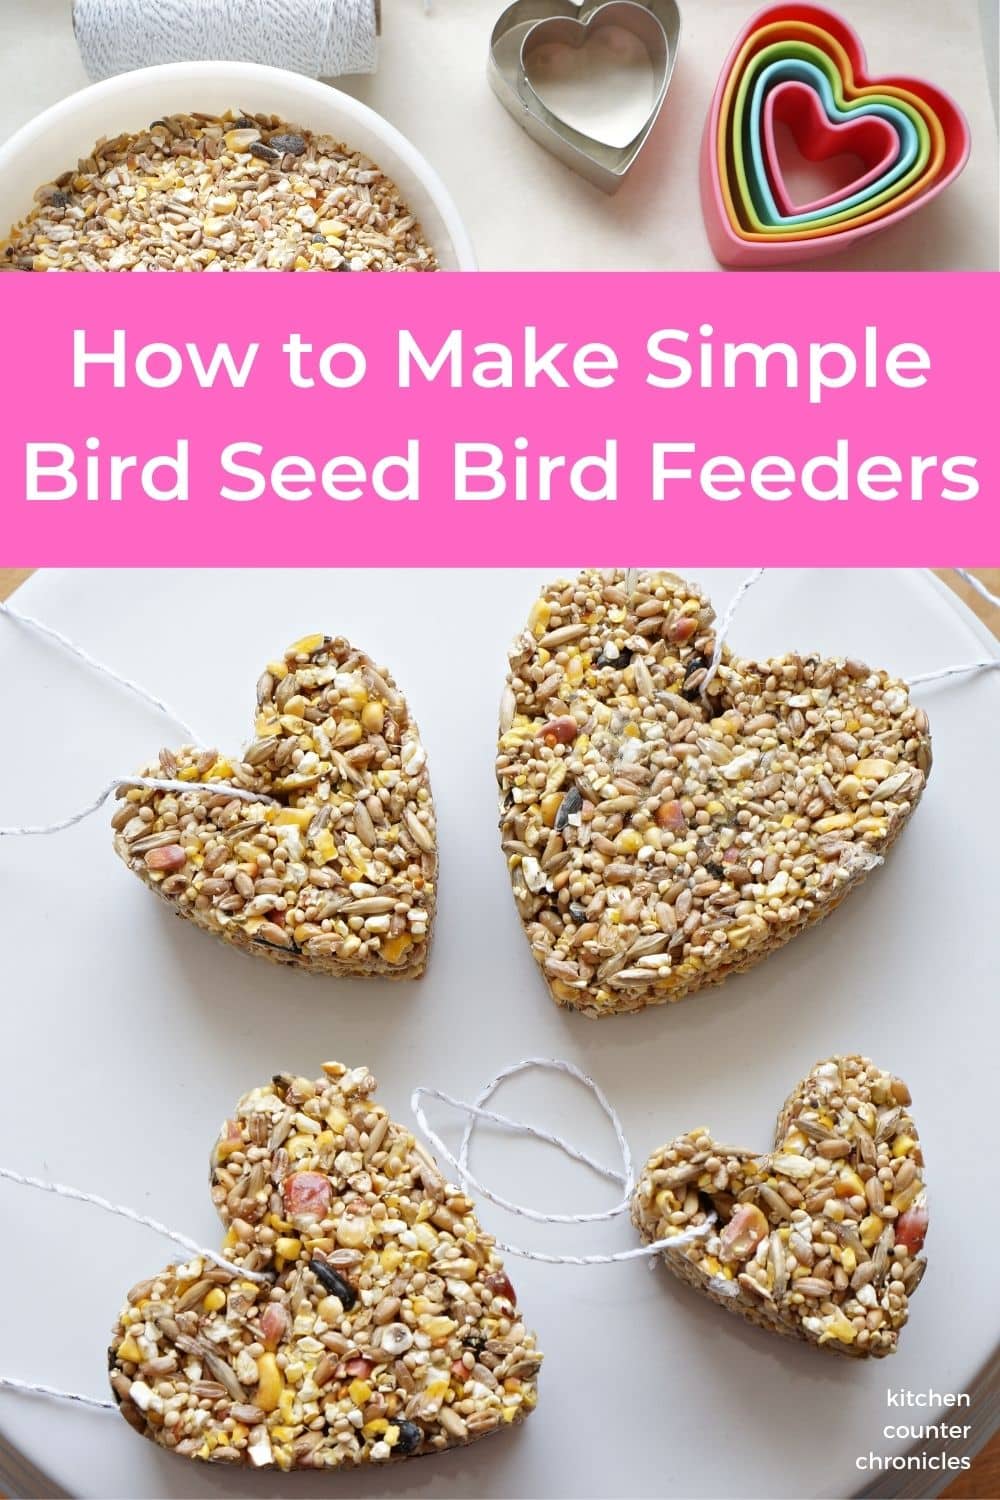 title "how to make a simple bird seed bird feeder" with image of 4 heart shaped birdseed cookie bird feeders